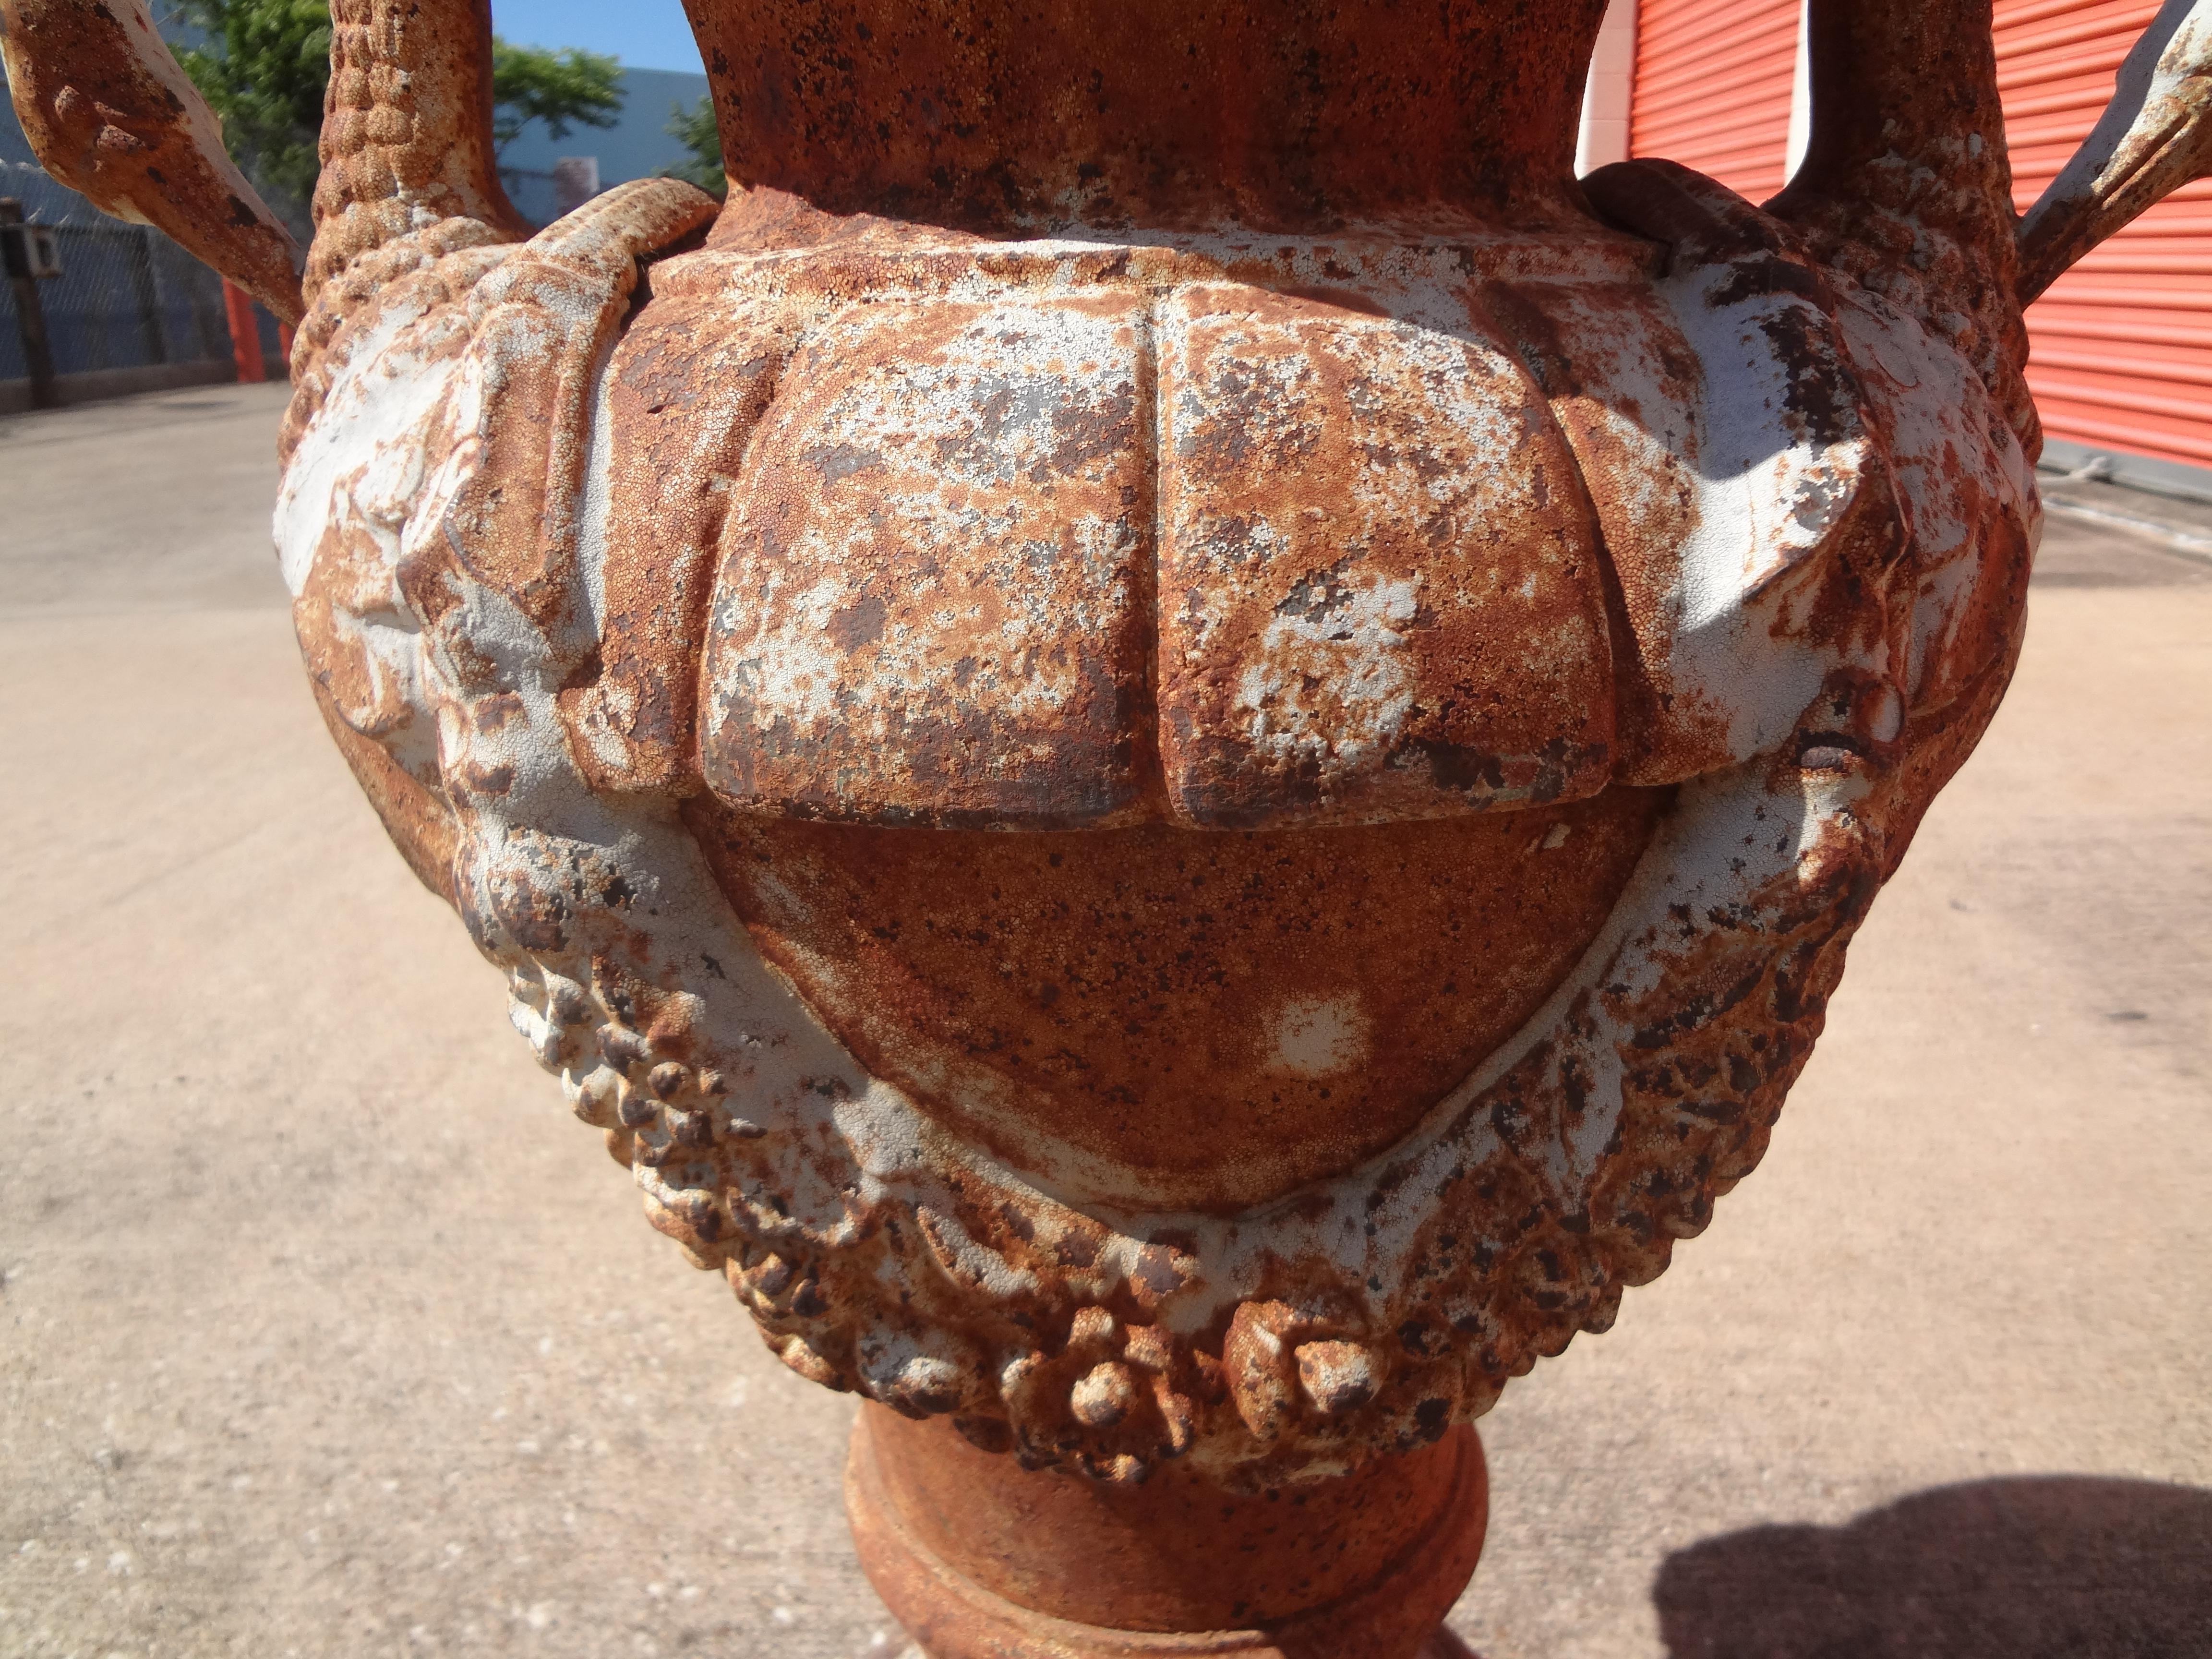 Large antique French Neoclassical style cast iron garden urn with swan handles and swag motif. This gorgeous huge Neoclassical iron urn, planter or jardinière dates to the 1920s is in great structural condition. A fabulous garden ornament or